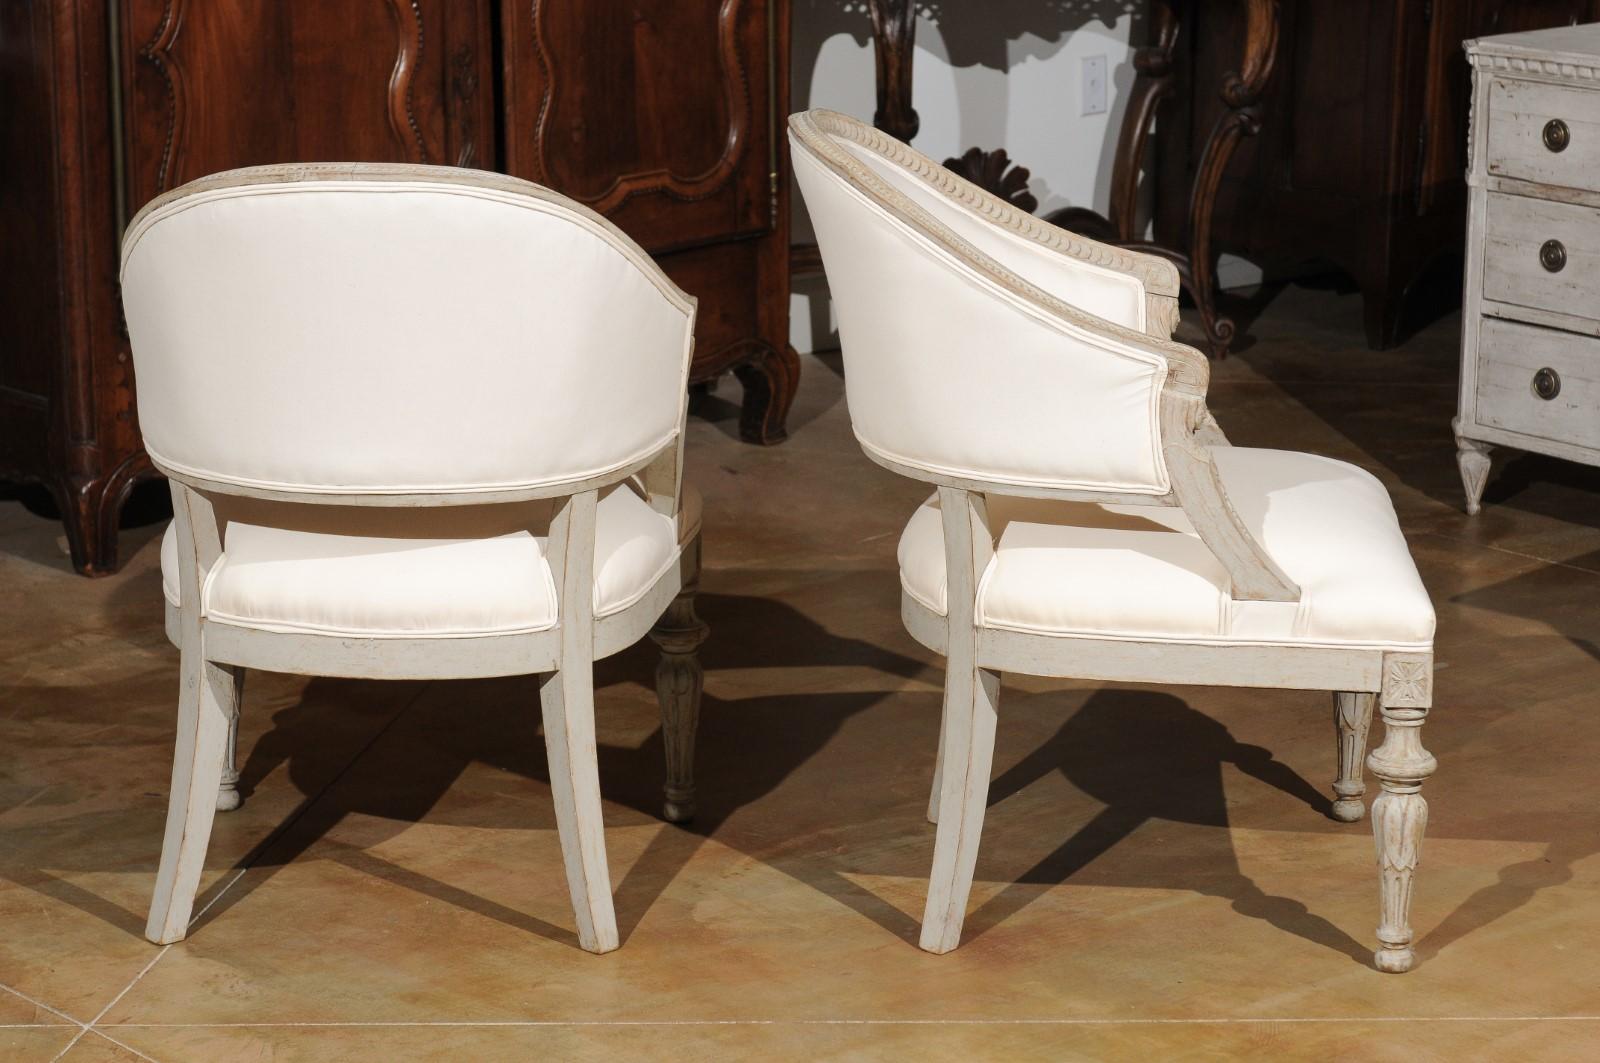 Upholstery Pair of Swedish Neoclassical Style 19th Century Barrel-Back Upholstered Chairs